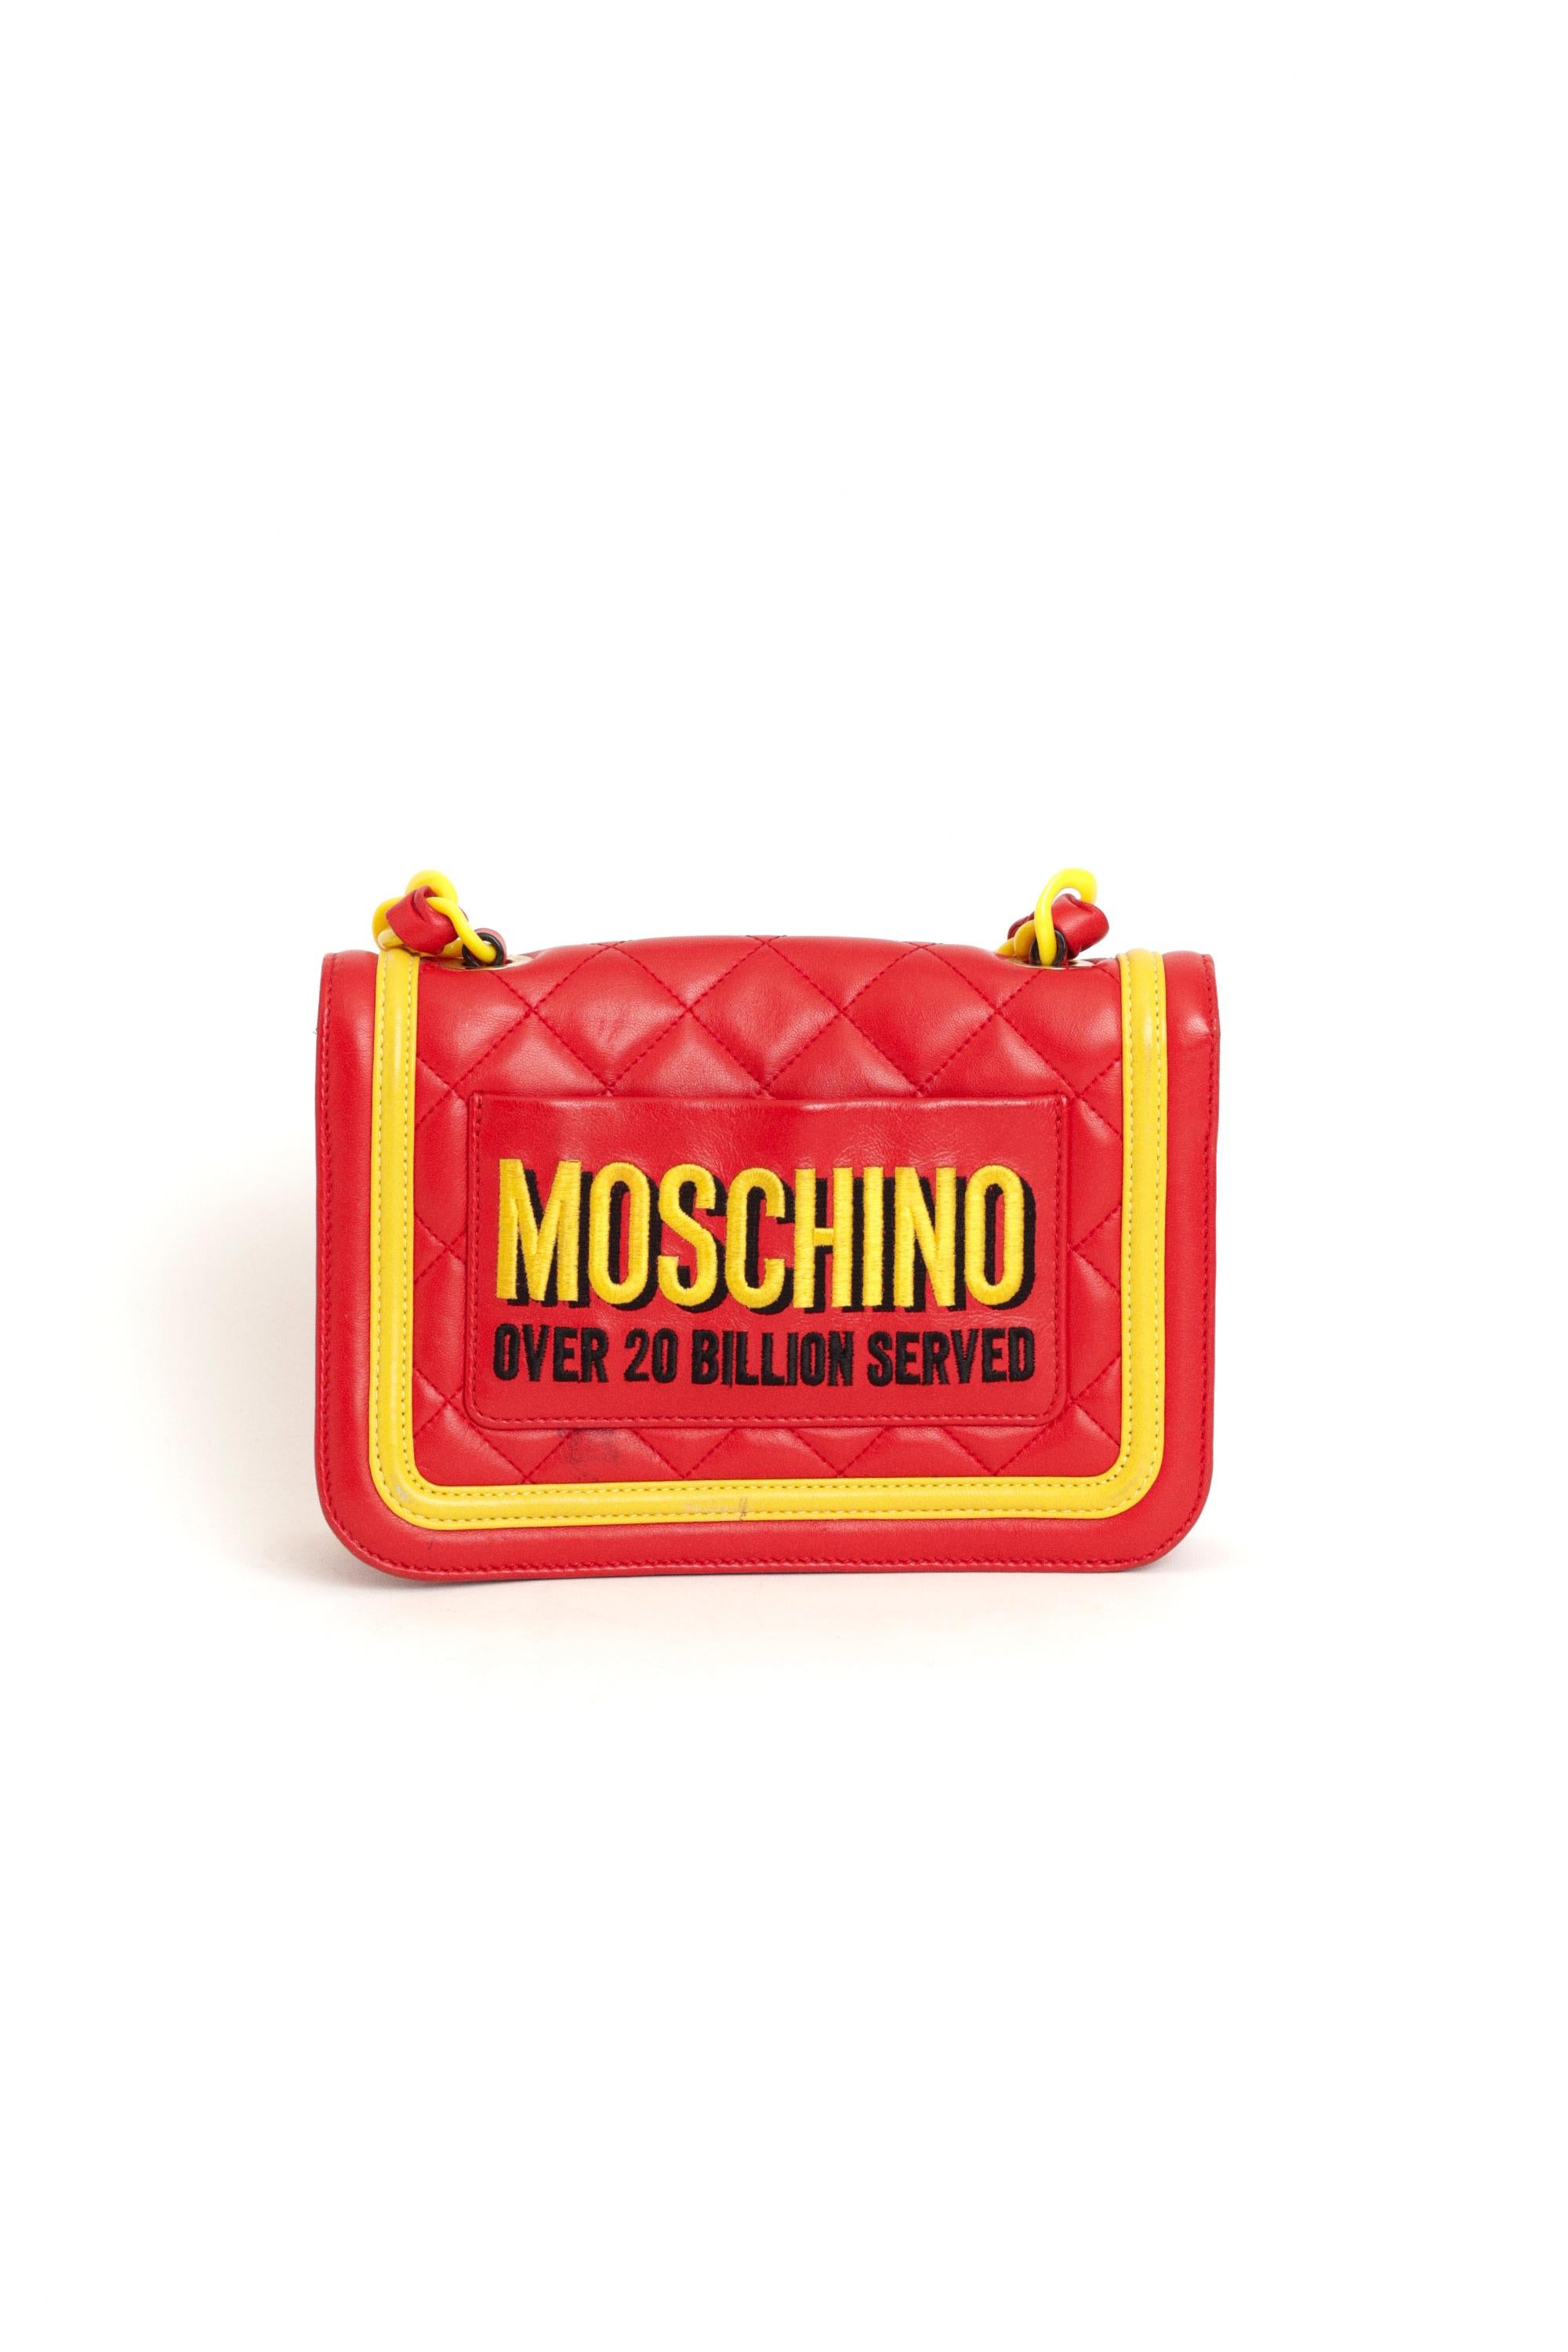 Nordic Poetry is excited to present this incredibly iconic Moschino Fall Winter 2014 McDonald's red leather crossbody bag, from The FastFood Collection by Jeremy Scott. Features chain strap, two inside compartments, inside zip back pocket and an